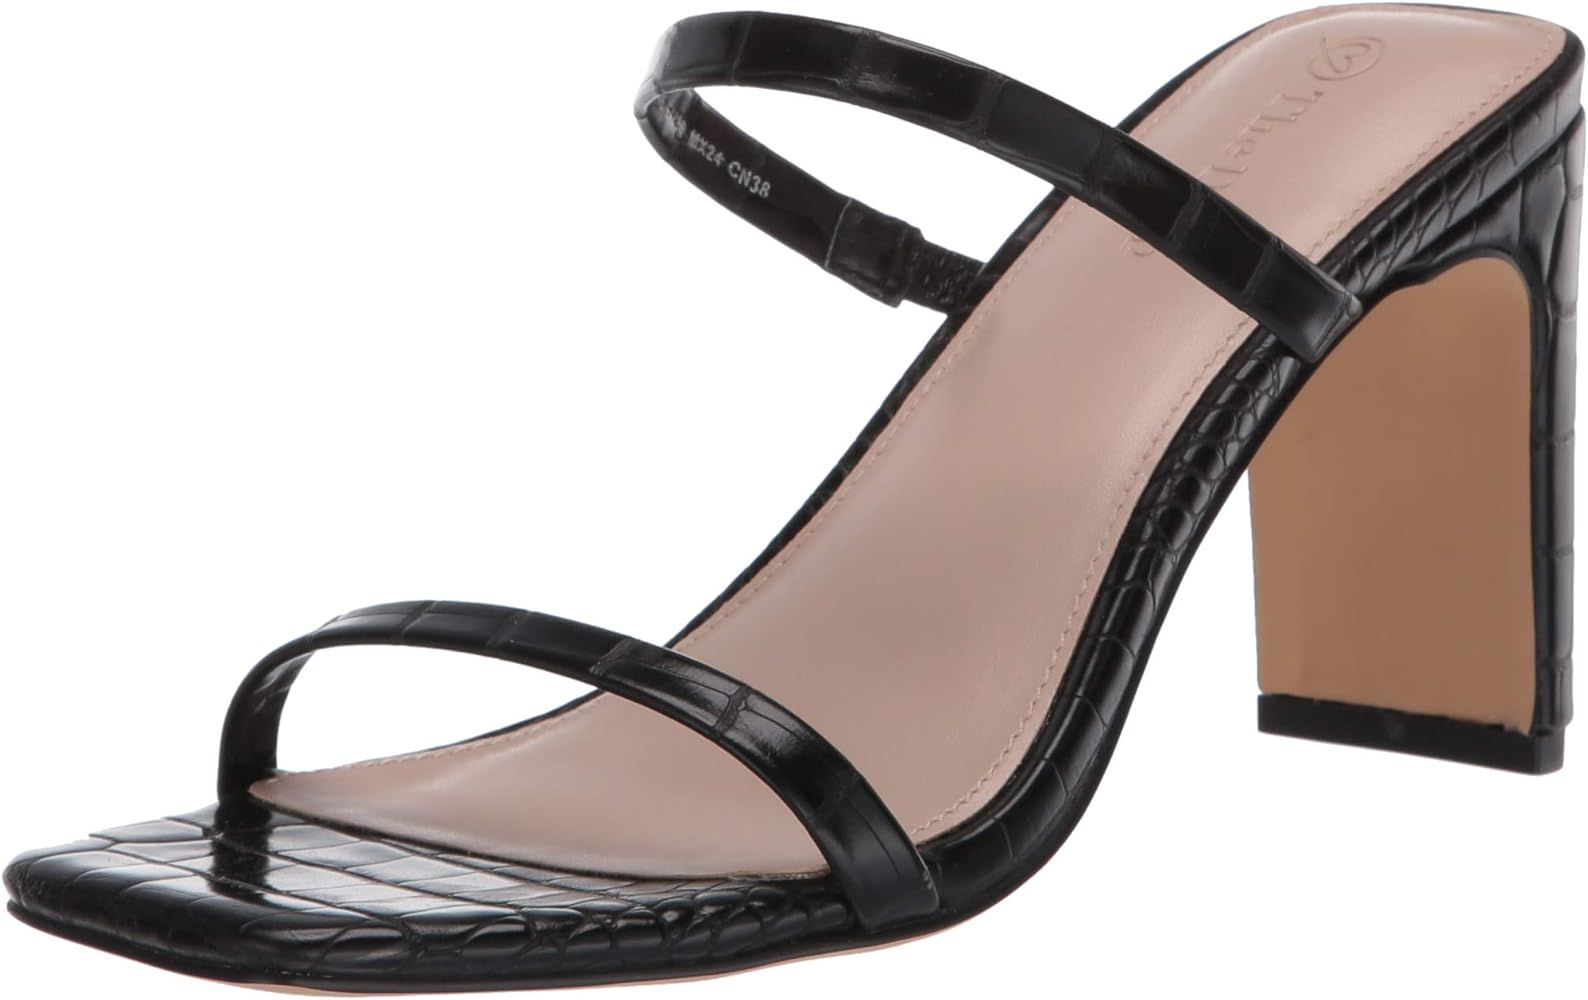 The Drop Women's Avery Square Toe Two Strap High Heeled Sandal | Amazon (UK)